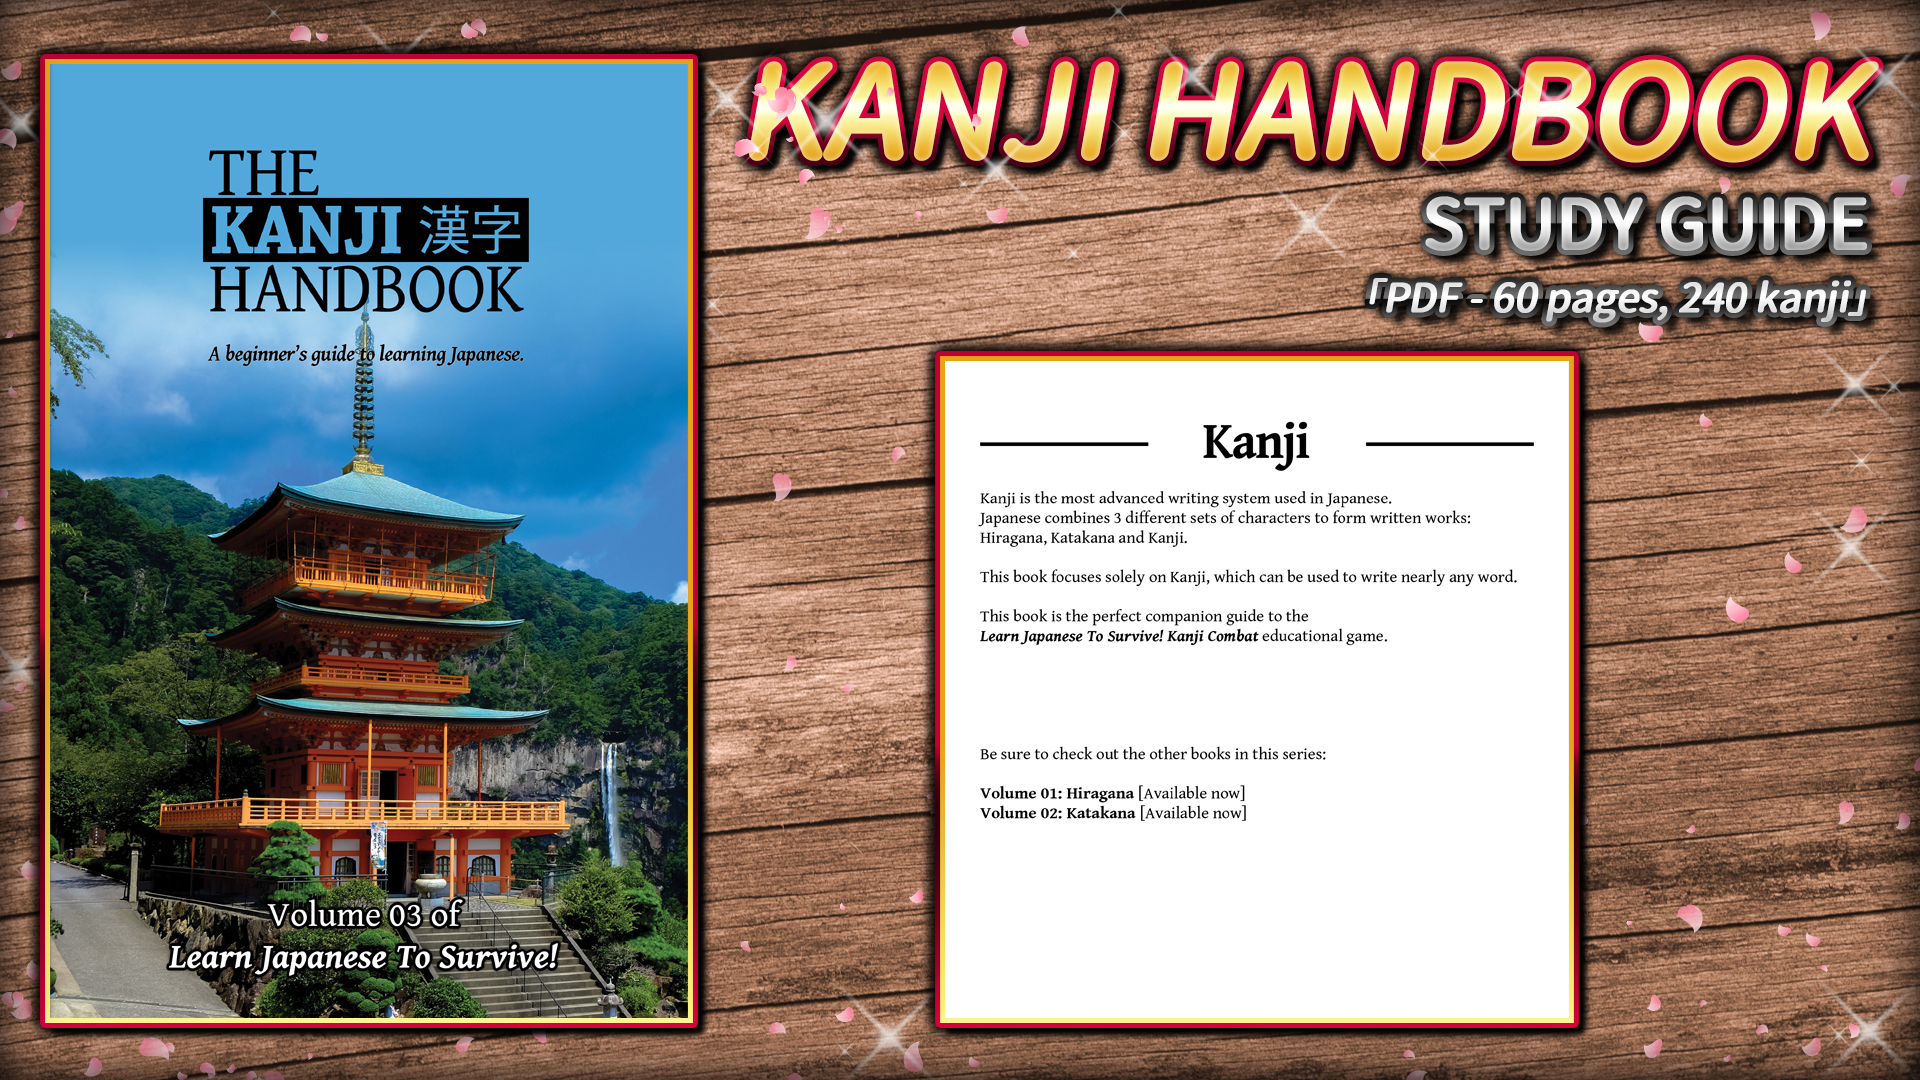 Learn Japanese To Survive! Kanji Combat - Study Guide Featured Screenshot #1